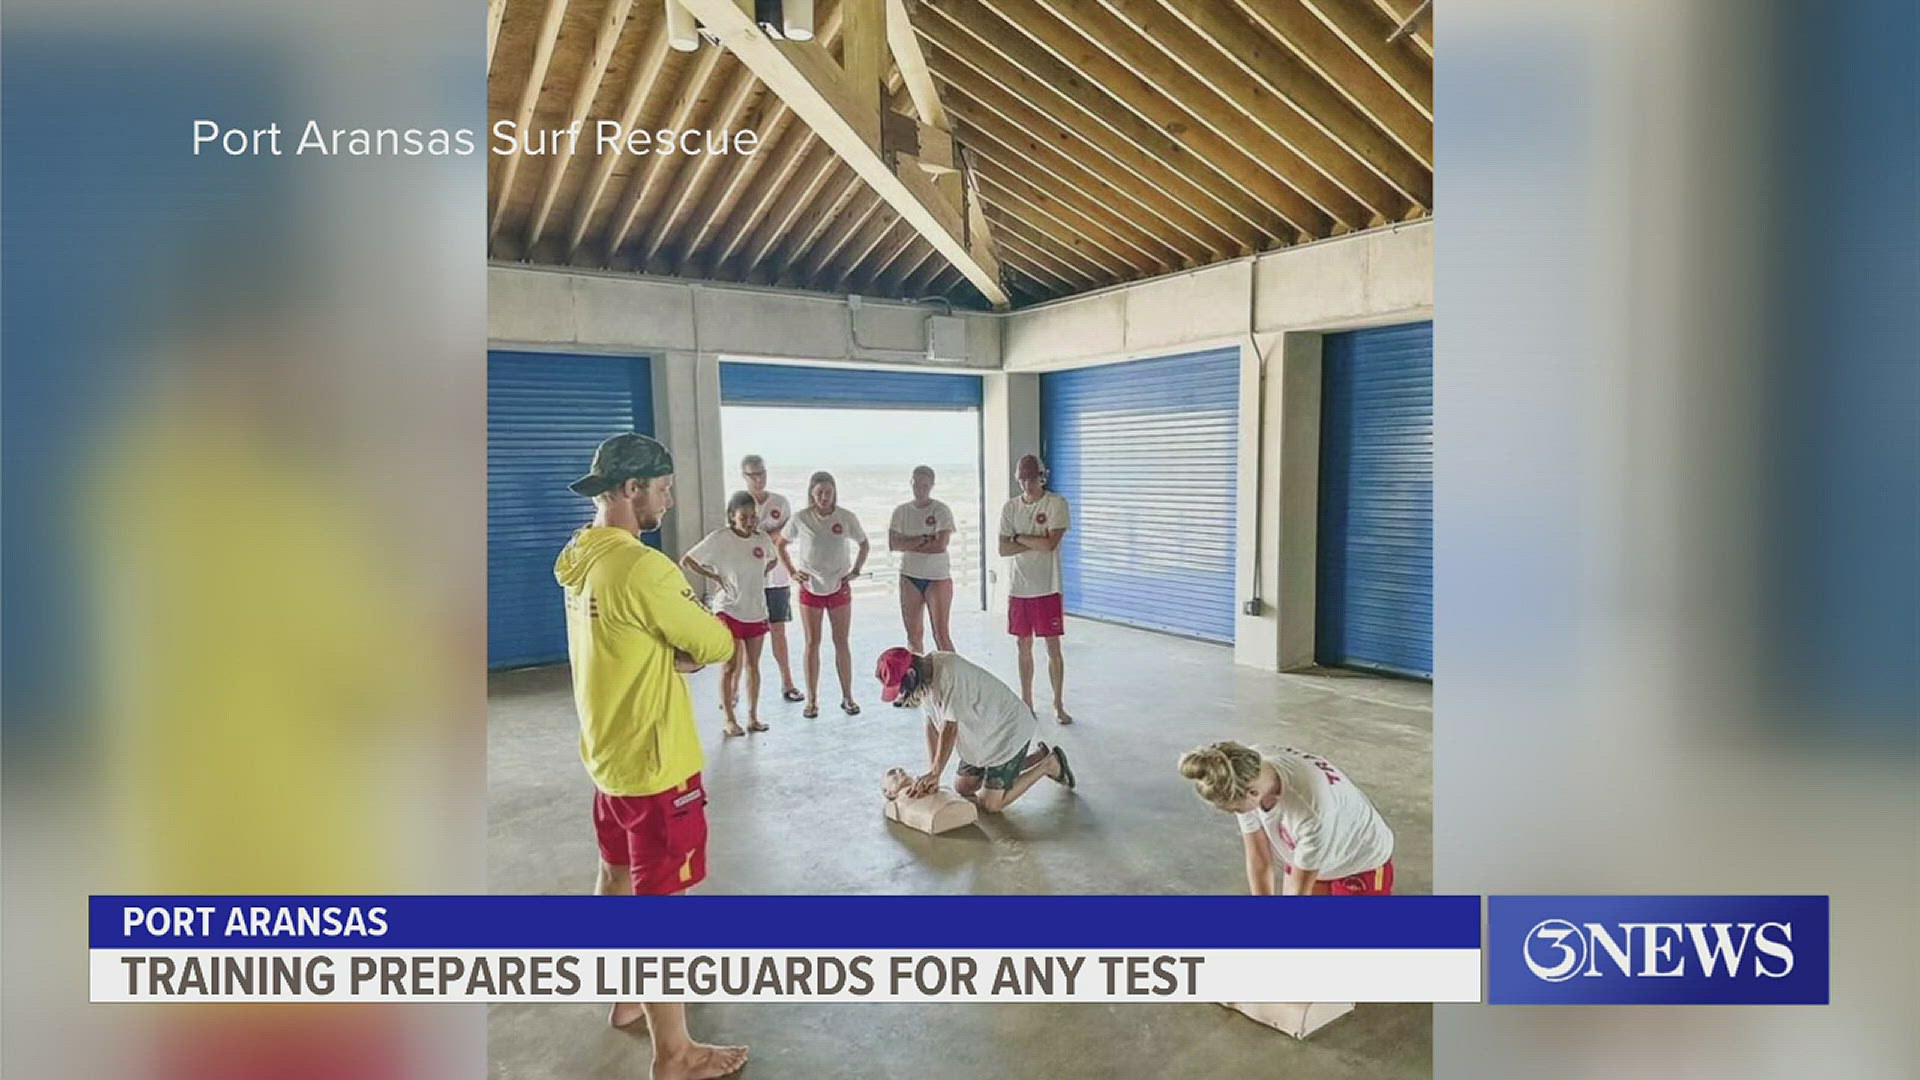 Port Aransas Surf Rescue is looking to hire 10 more lifeguards with two training programs starting on May 13 and June 3. Visit kiiitv.com for more information.